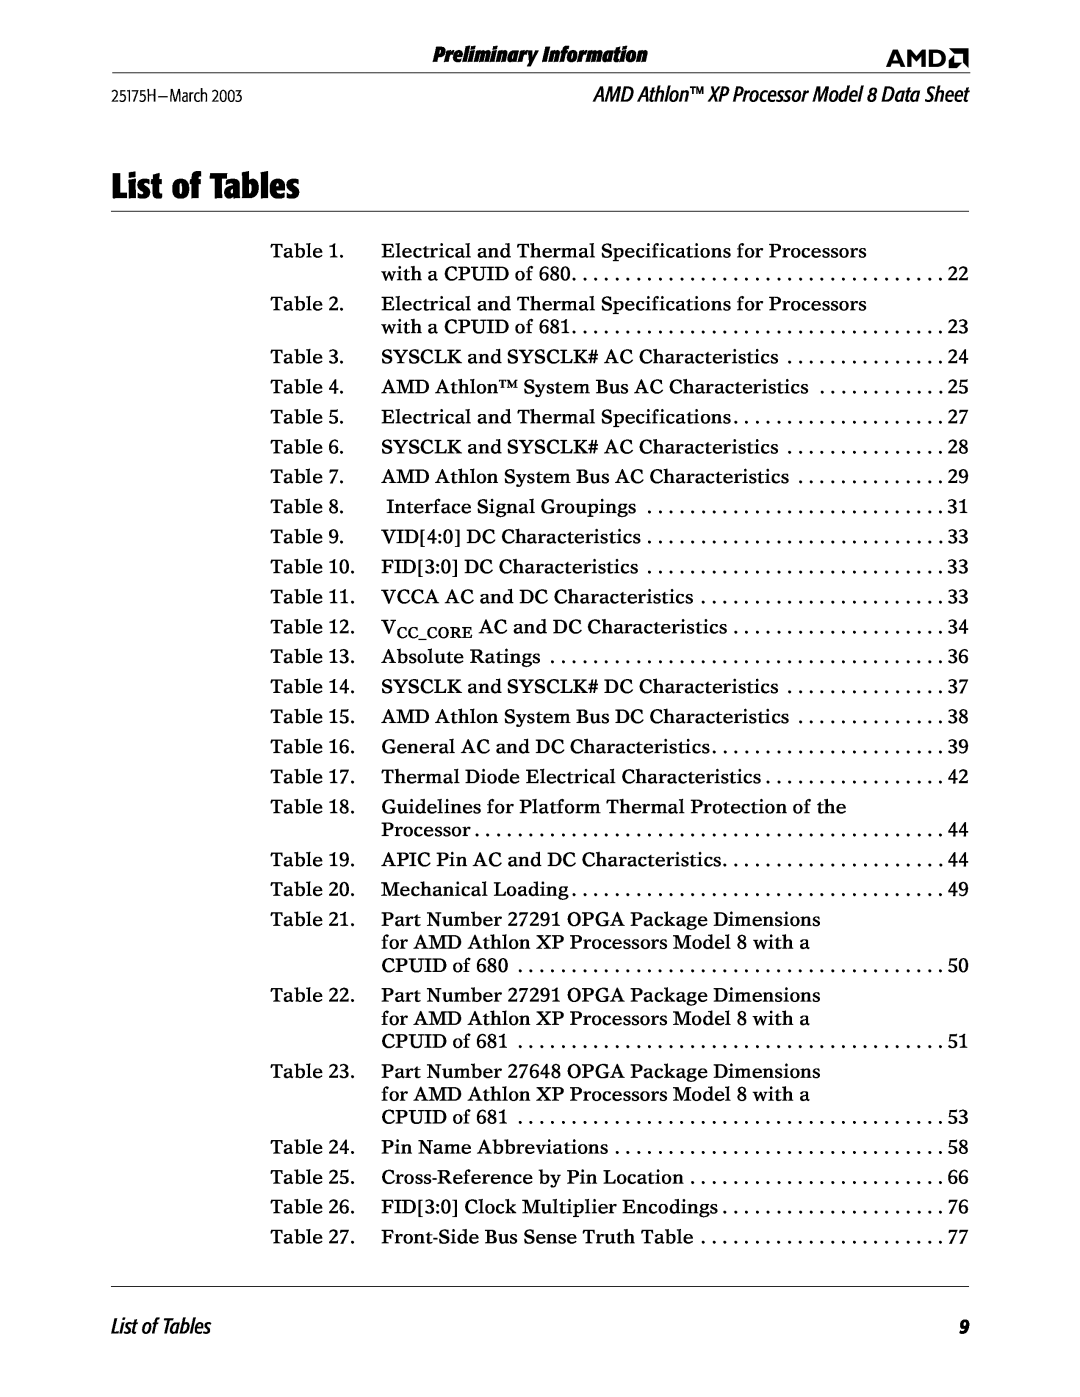 AMD 8 manual List of Tables, Preliminary Information 